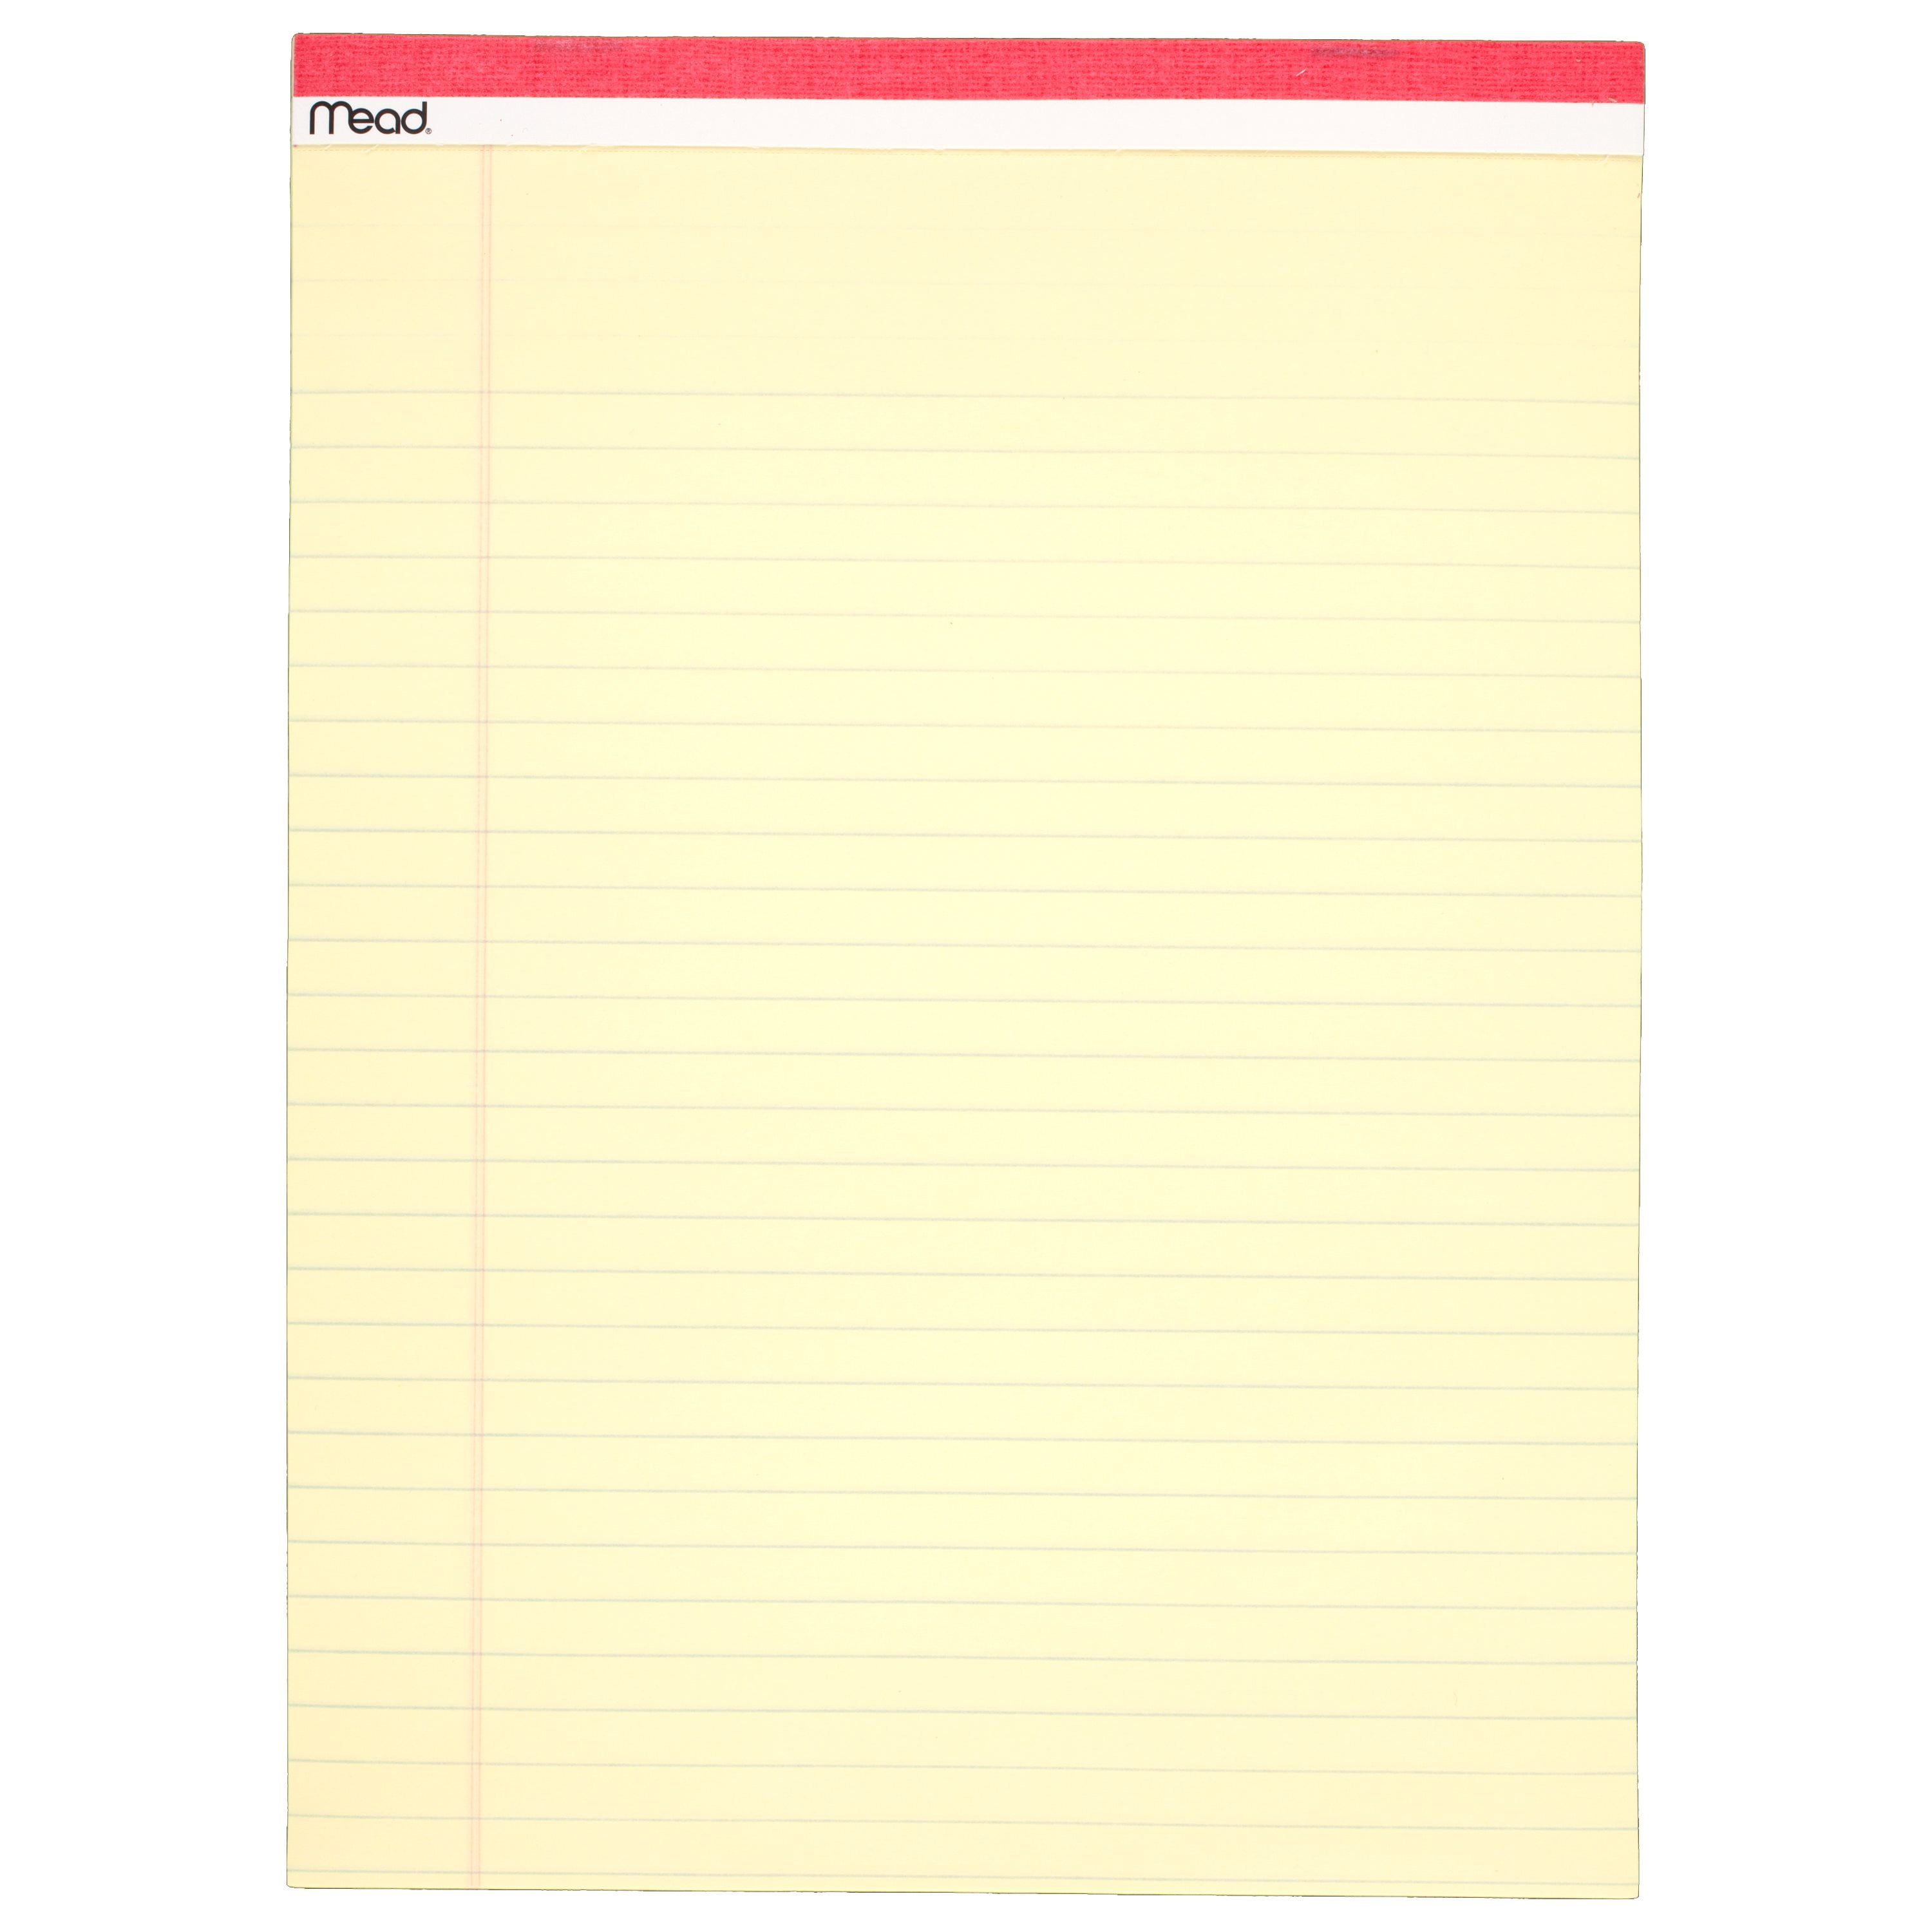 50 Sheets per Pad Mead Legal Pad White 8-1/2 x 11-3/4 Inches 6 Pack Perforated 